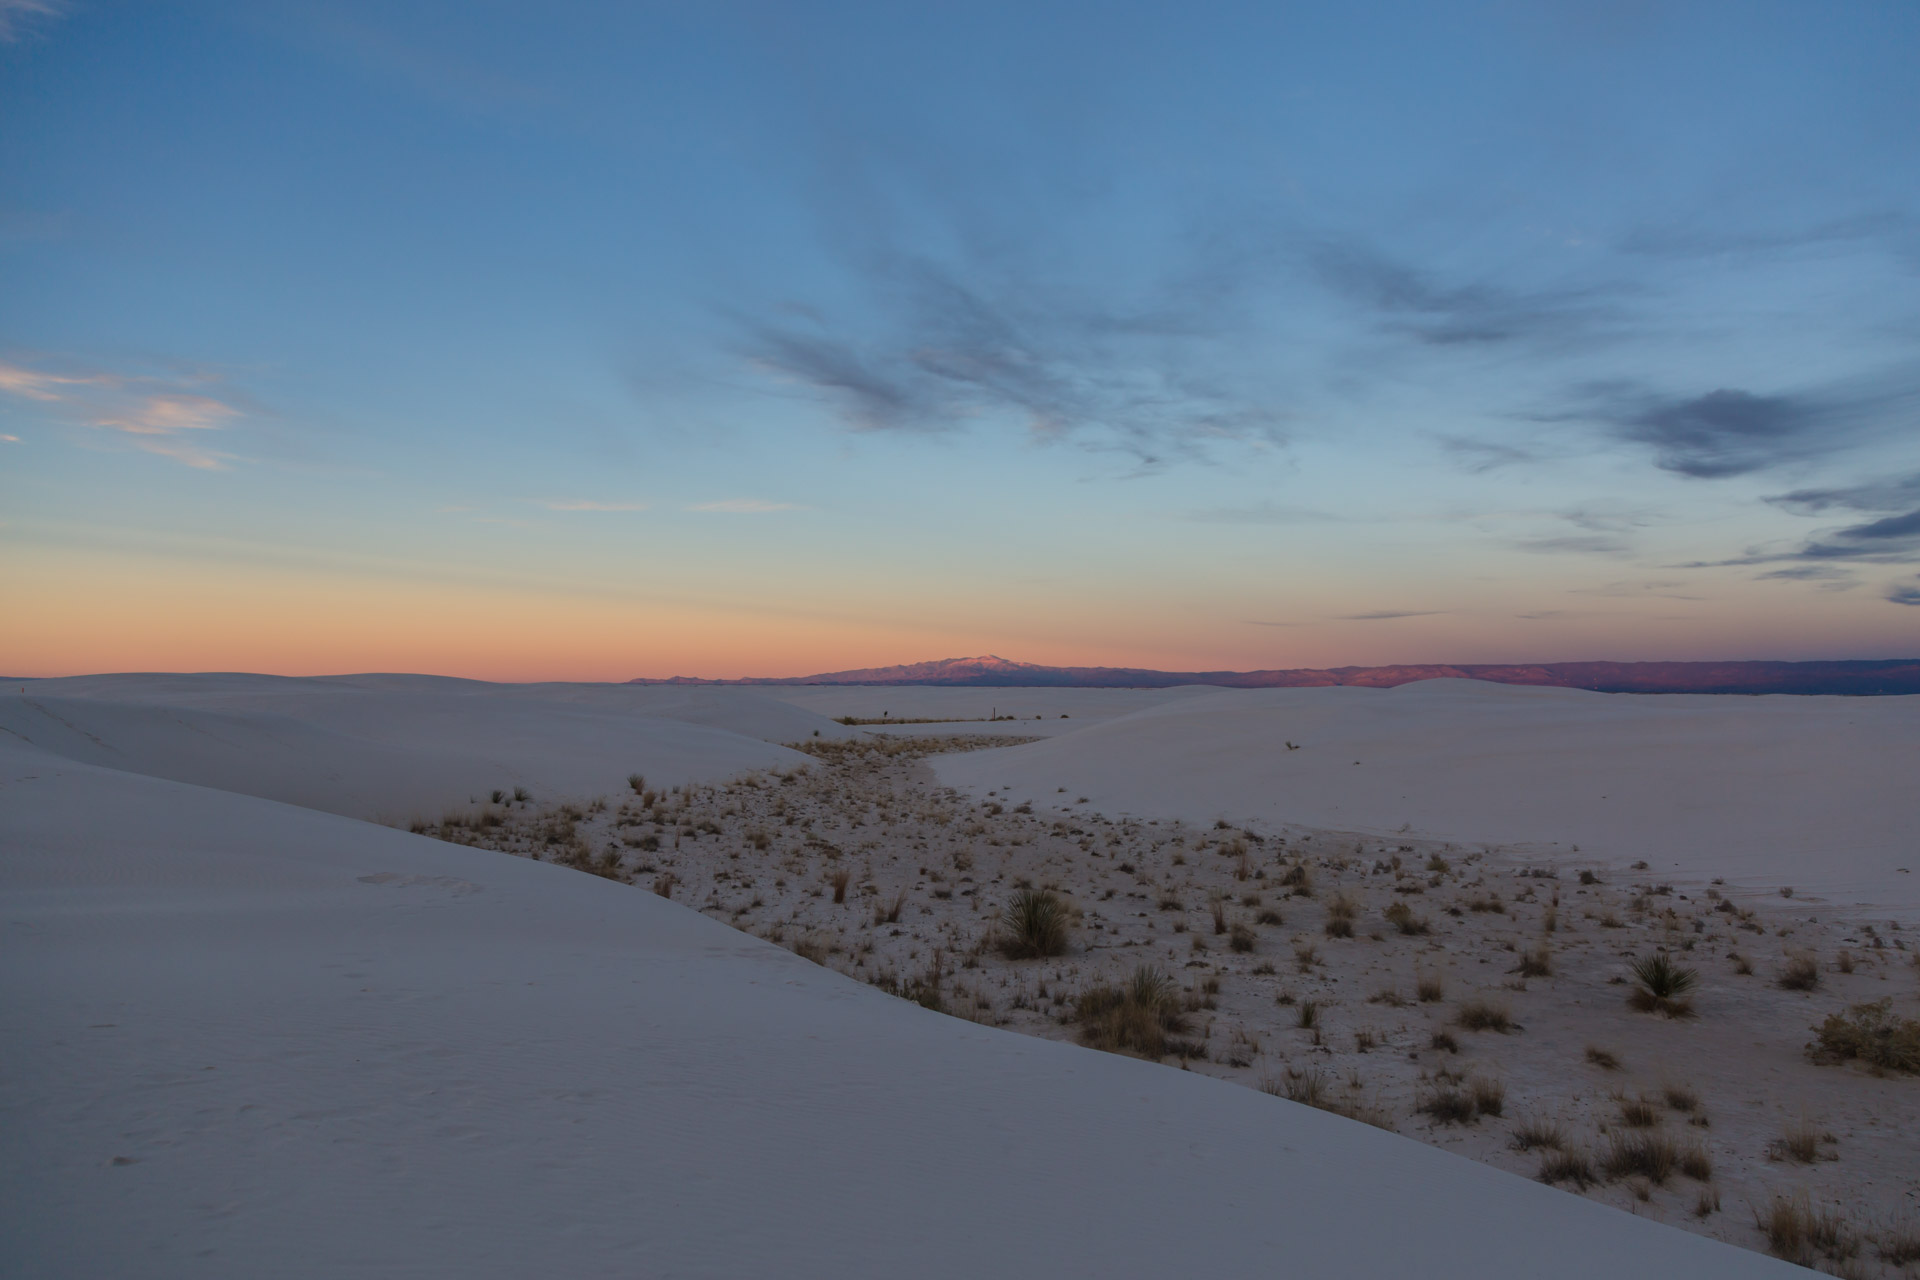 In A Sunset At White Sands (view 1)